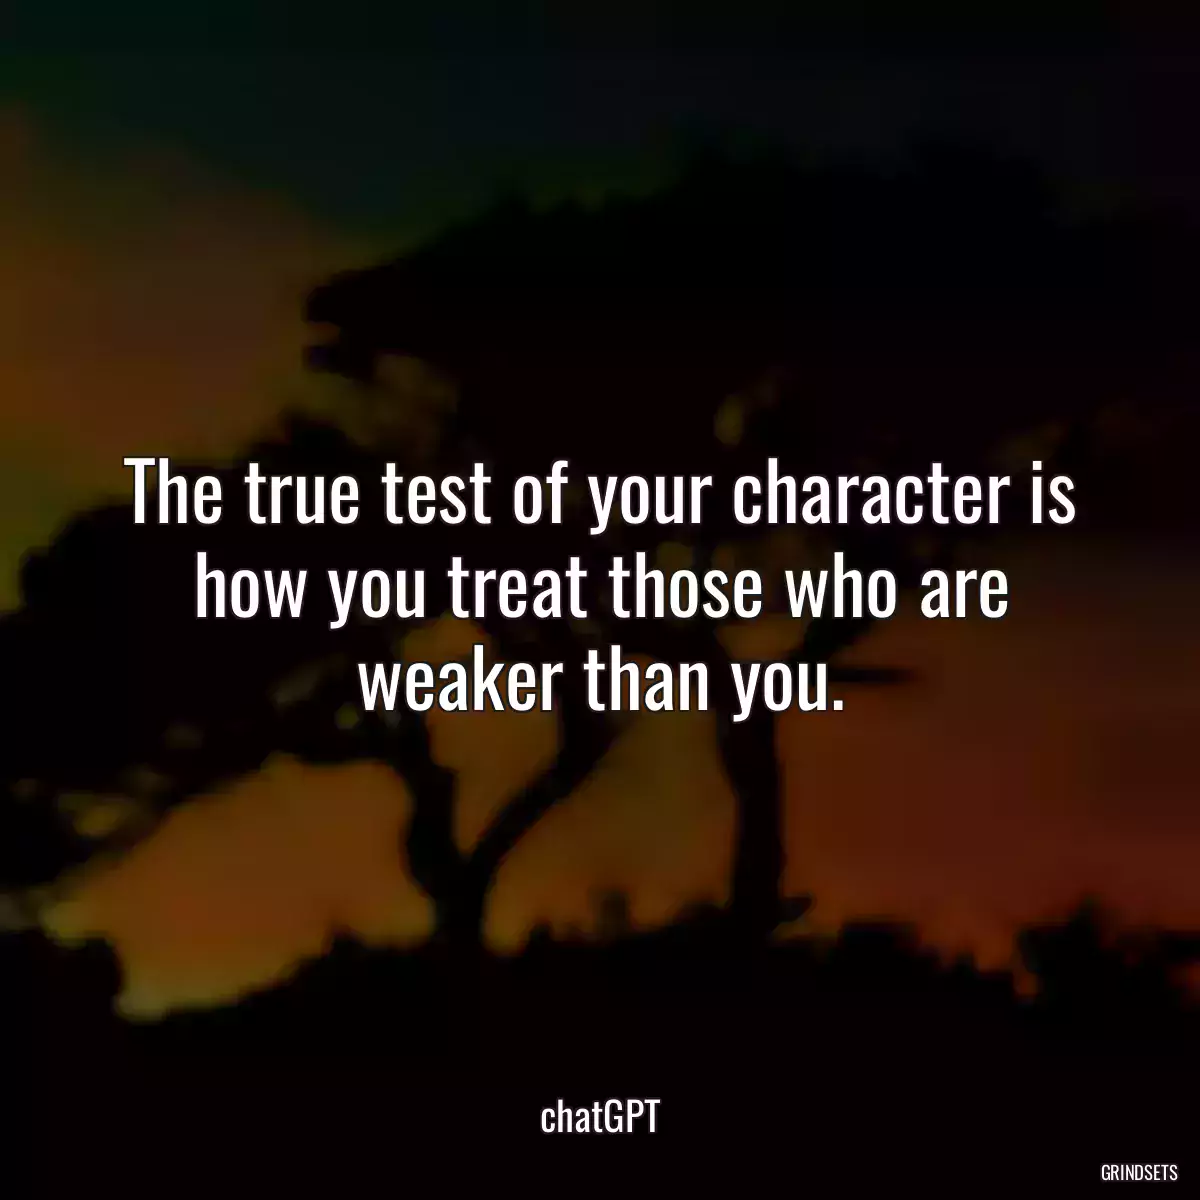 The true test of your character is how you treat those who are weaker than you.